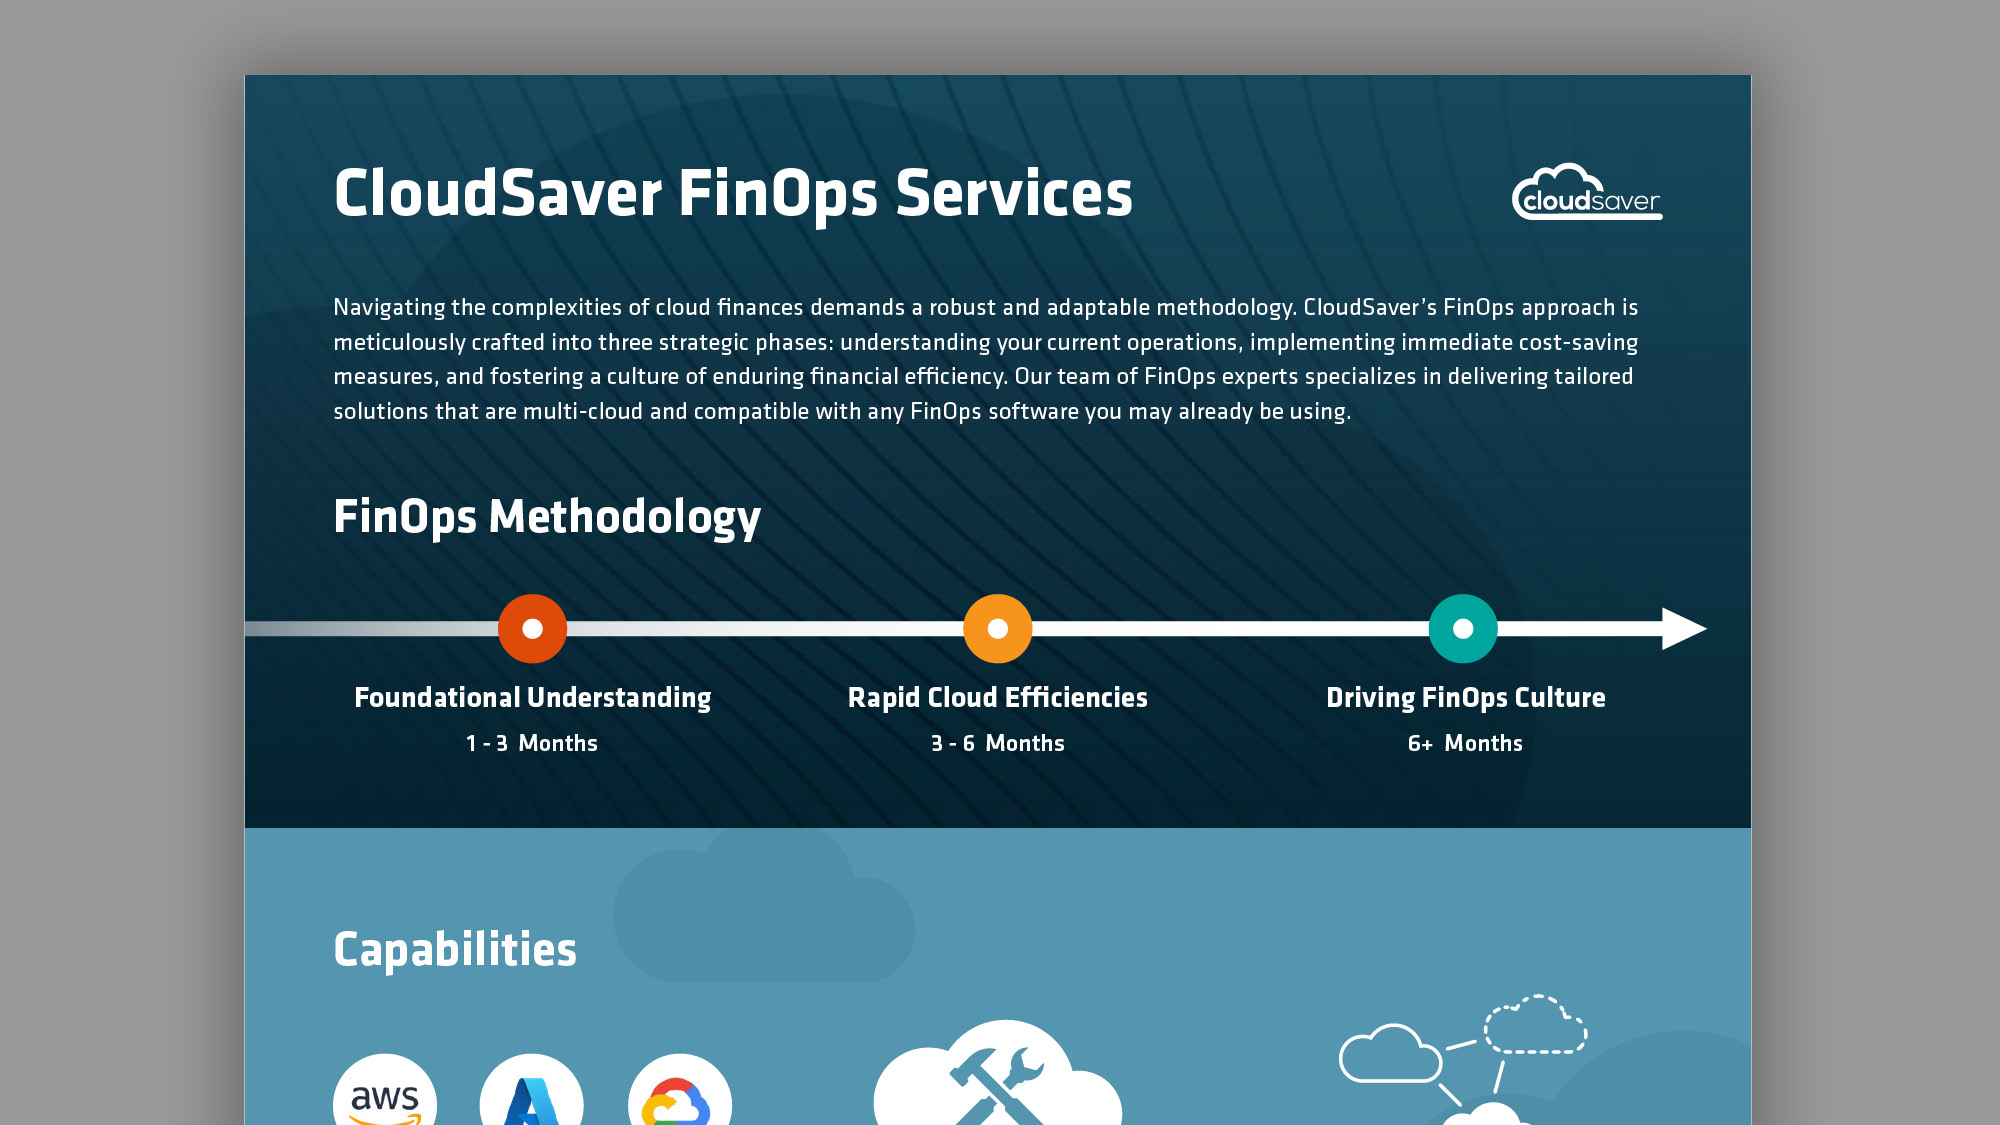 CloudSaver – FinOps Services